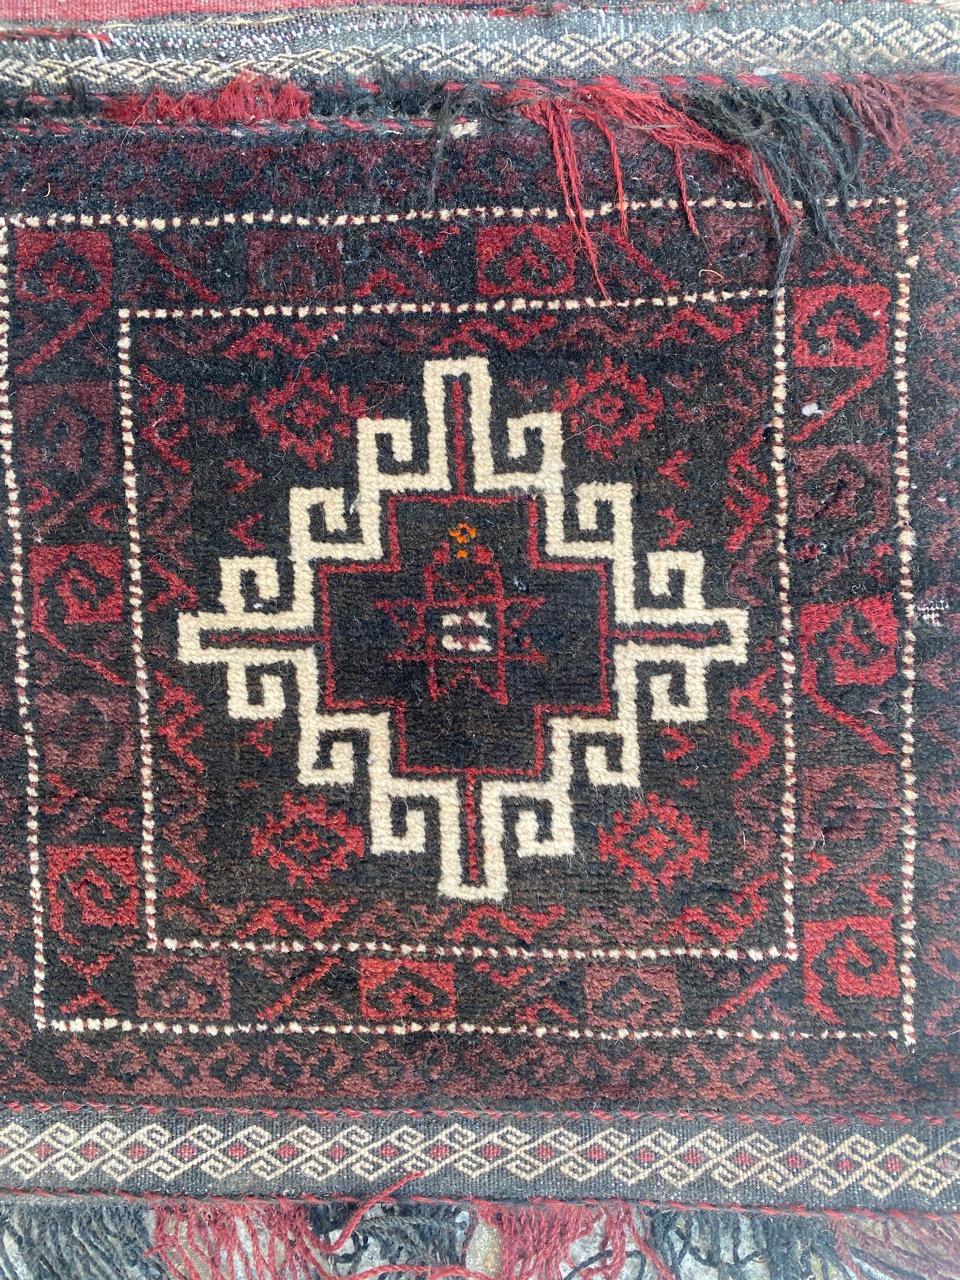 Very beautiful mid century Turkmen composite bag faces rugs with a backside of a woven Kilim with nice geometrical tribal design and nice colors, entirely hand knotted and hand woven with wool on wool foundation.